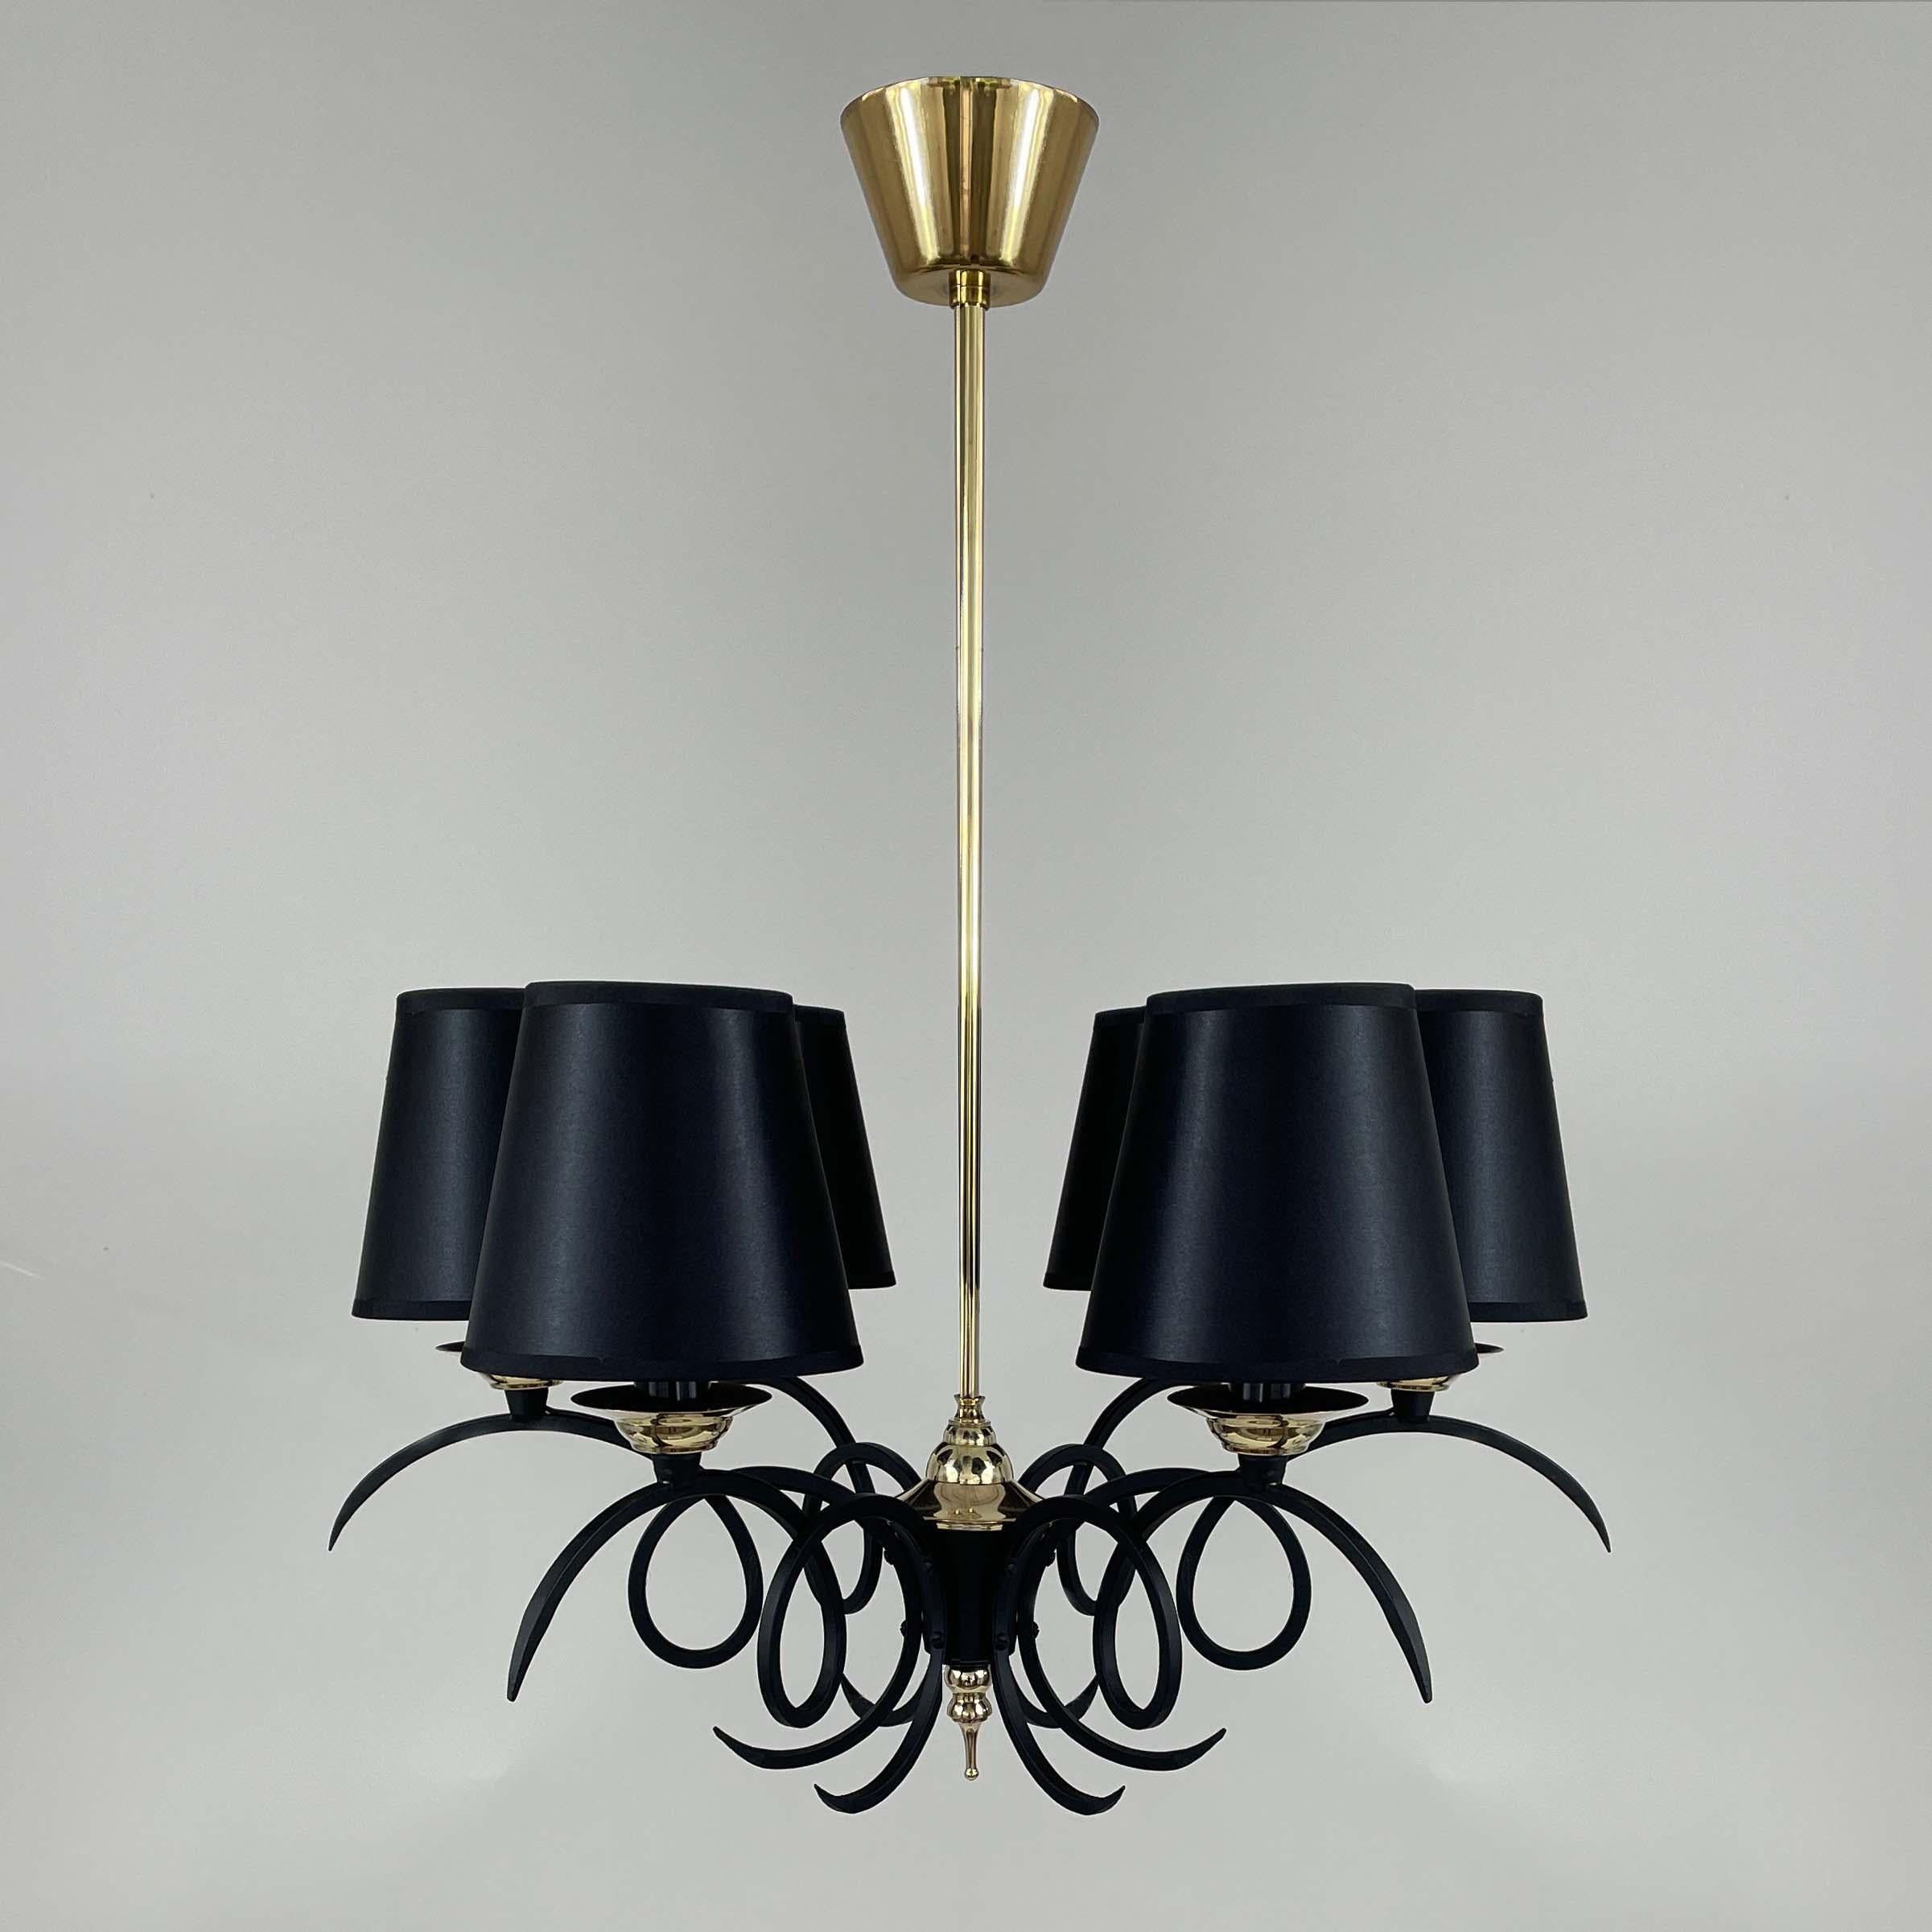 This unusual modernist chandelier was designed and manufactured in France in the 1950s. It features a black lacquered cast iron 6-light fixture with brass details. 

The light has been rewired and re-electrified and requires 6 E14 bulbs up to 60